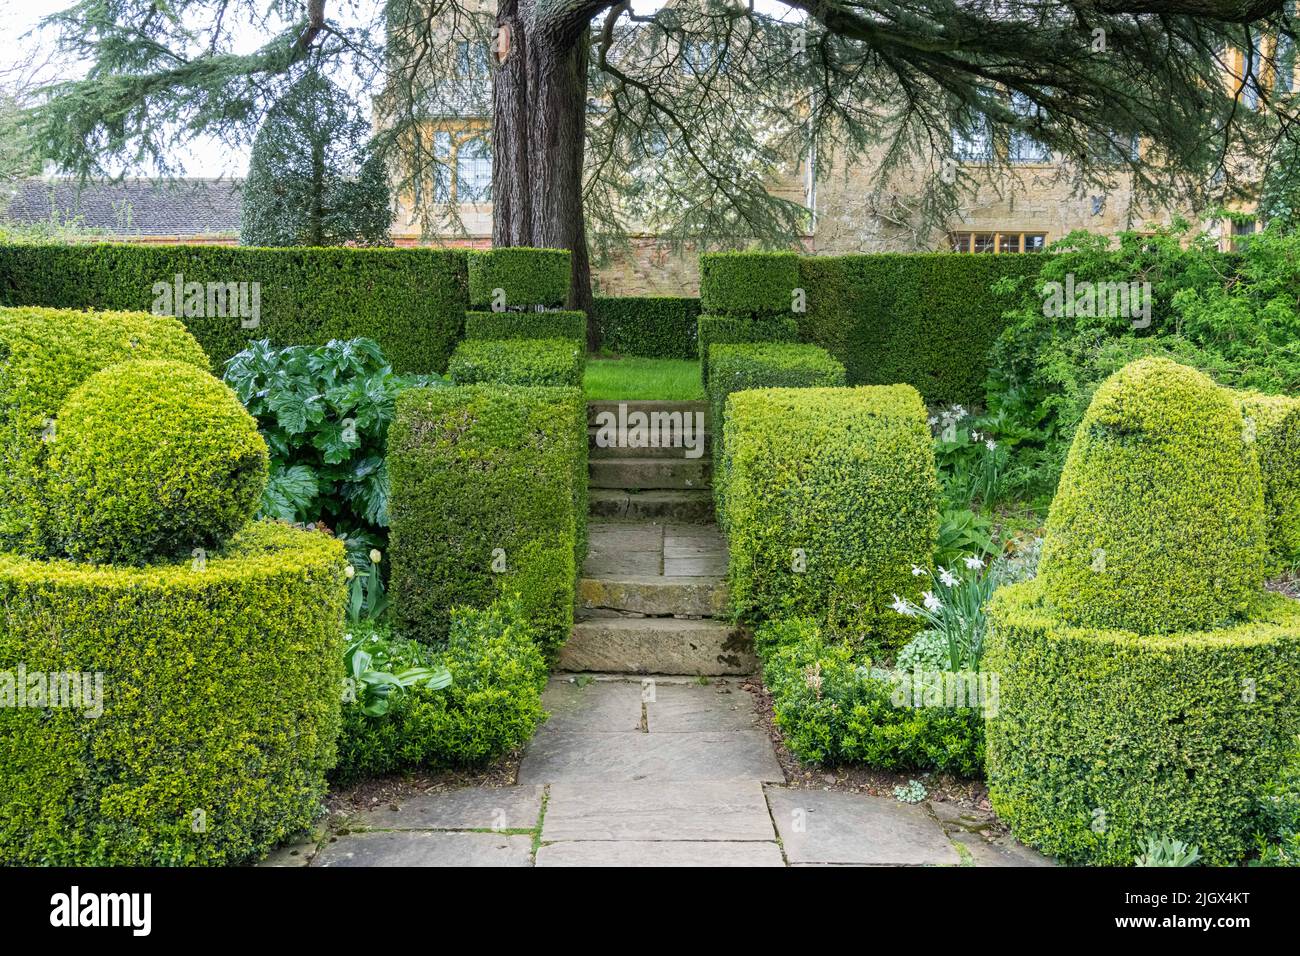 Hidcote Manor, National Trust, world renowned heritage garden, Hidcote Bartrim, near Chipping Campden,Gloucestershire, UK Stock Photo